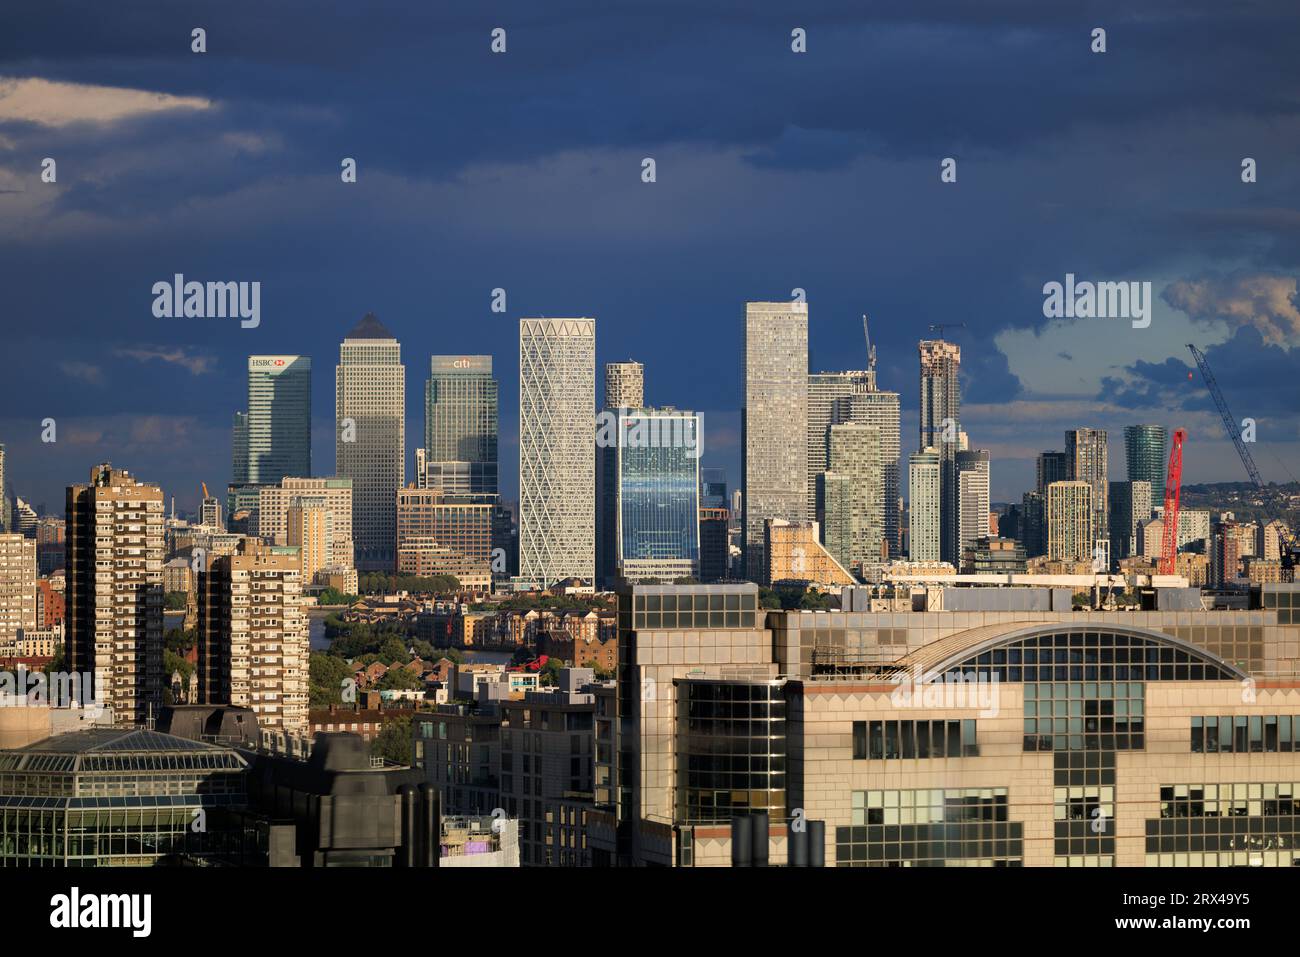 Canary Wharf and docklands development as seen from the City of London. Stock Photo